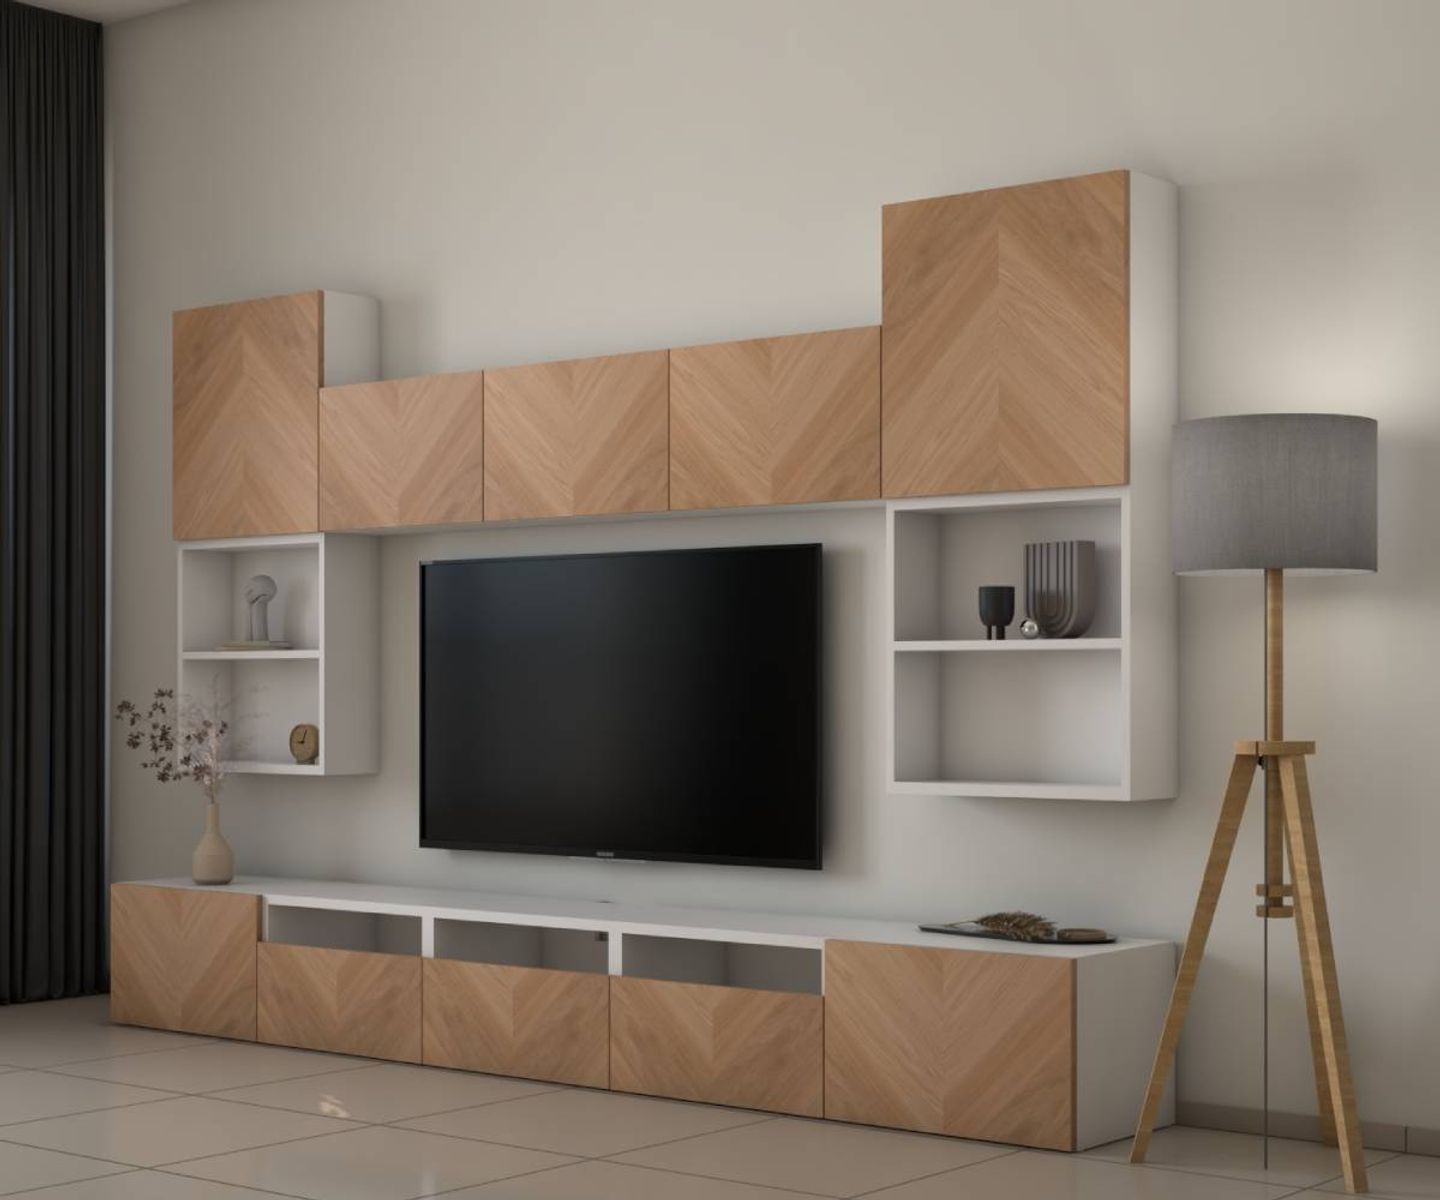 White And Wood TV Unit Design With Closed And Open Storage Units - Livspace